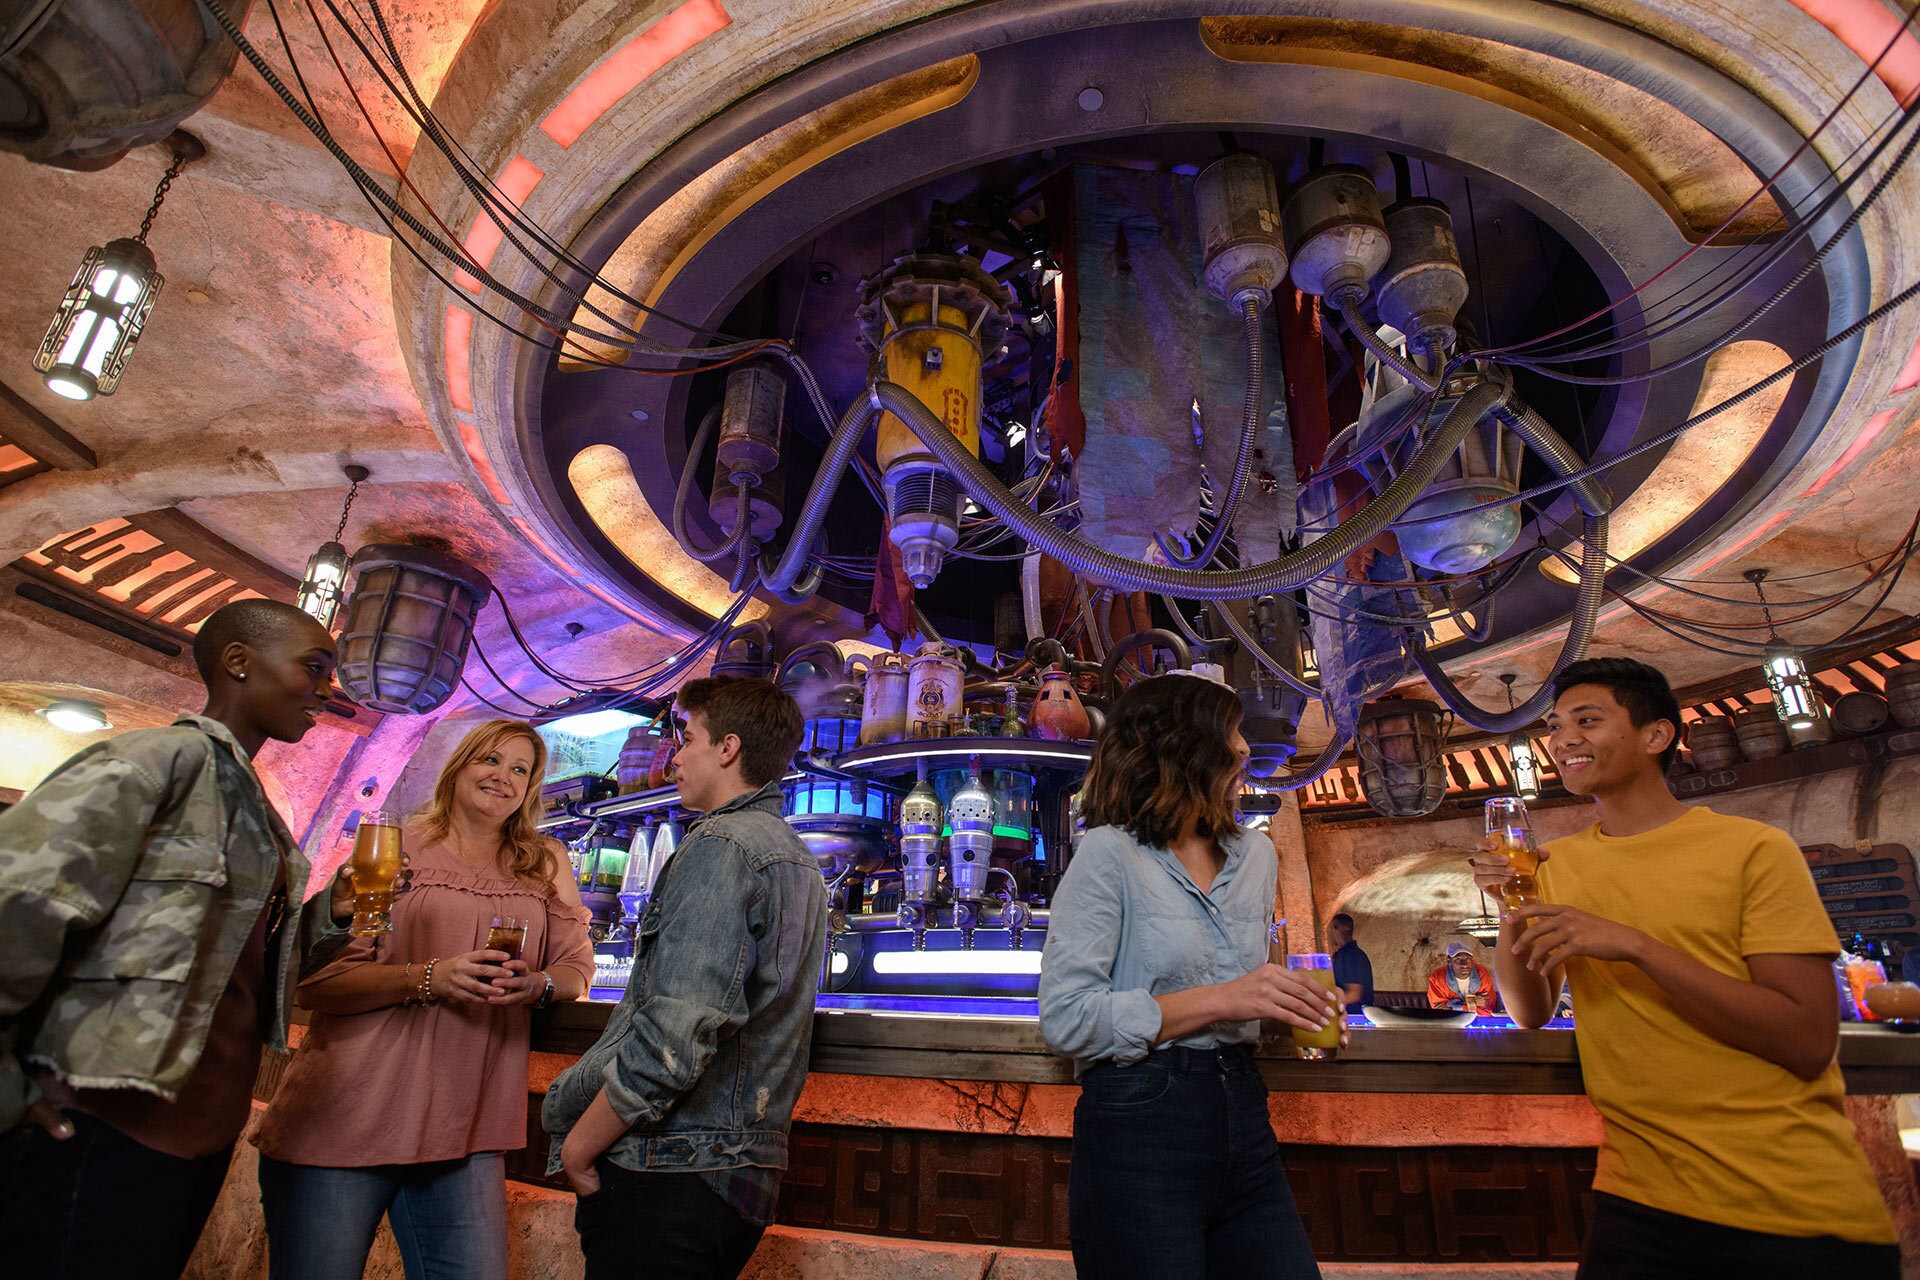 Oga’s Cantina – a local watering hole to unwind,
conduct business and maybe even encounter a fri...